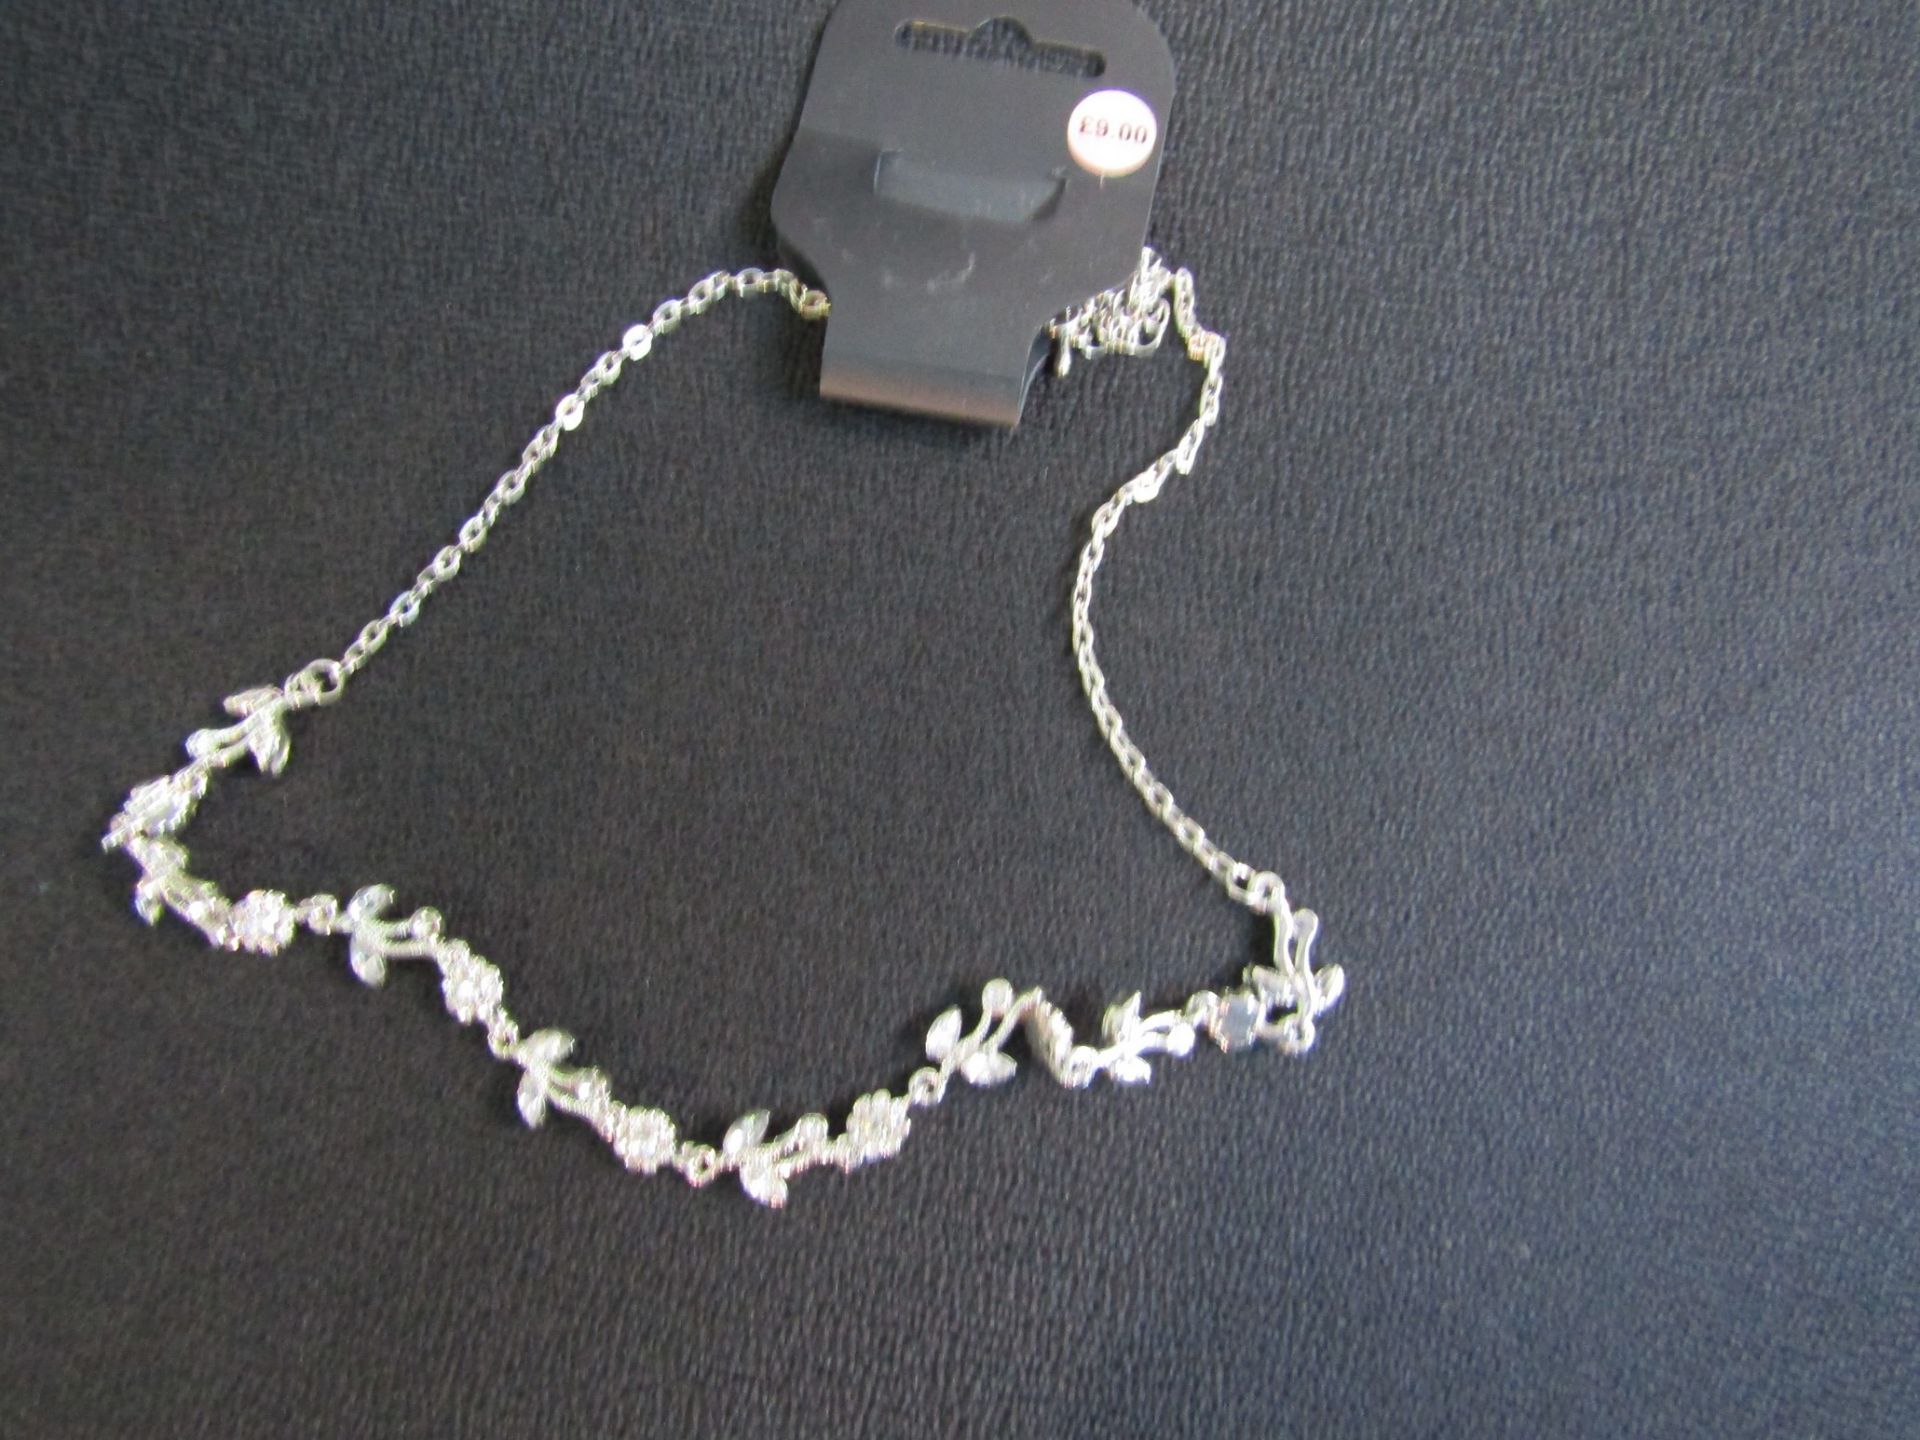 1 BRAND NEW SILVER METAL LINK NECKLACE RRP £9.00